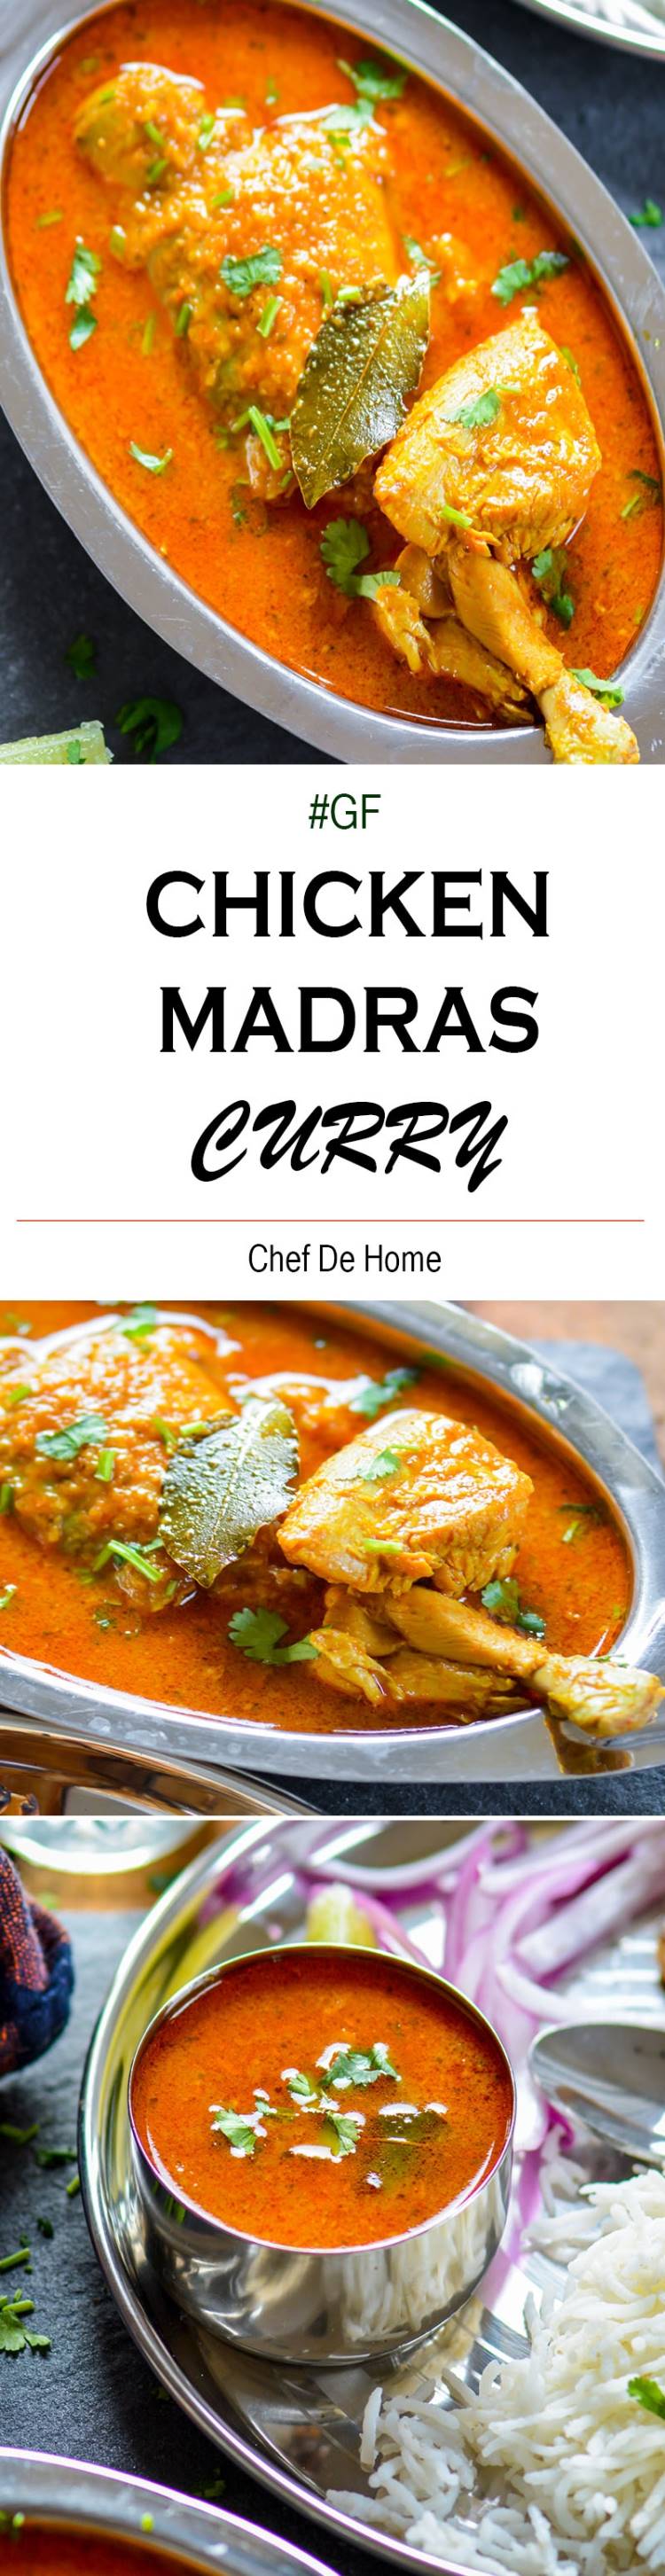 Easy Chicken Madras Curry Recipe made with coconut milk curry powder and flavored with tamarind paste | chefdehome.com